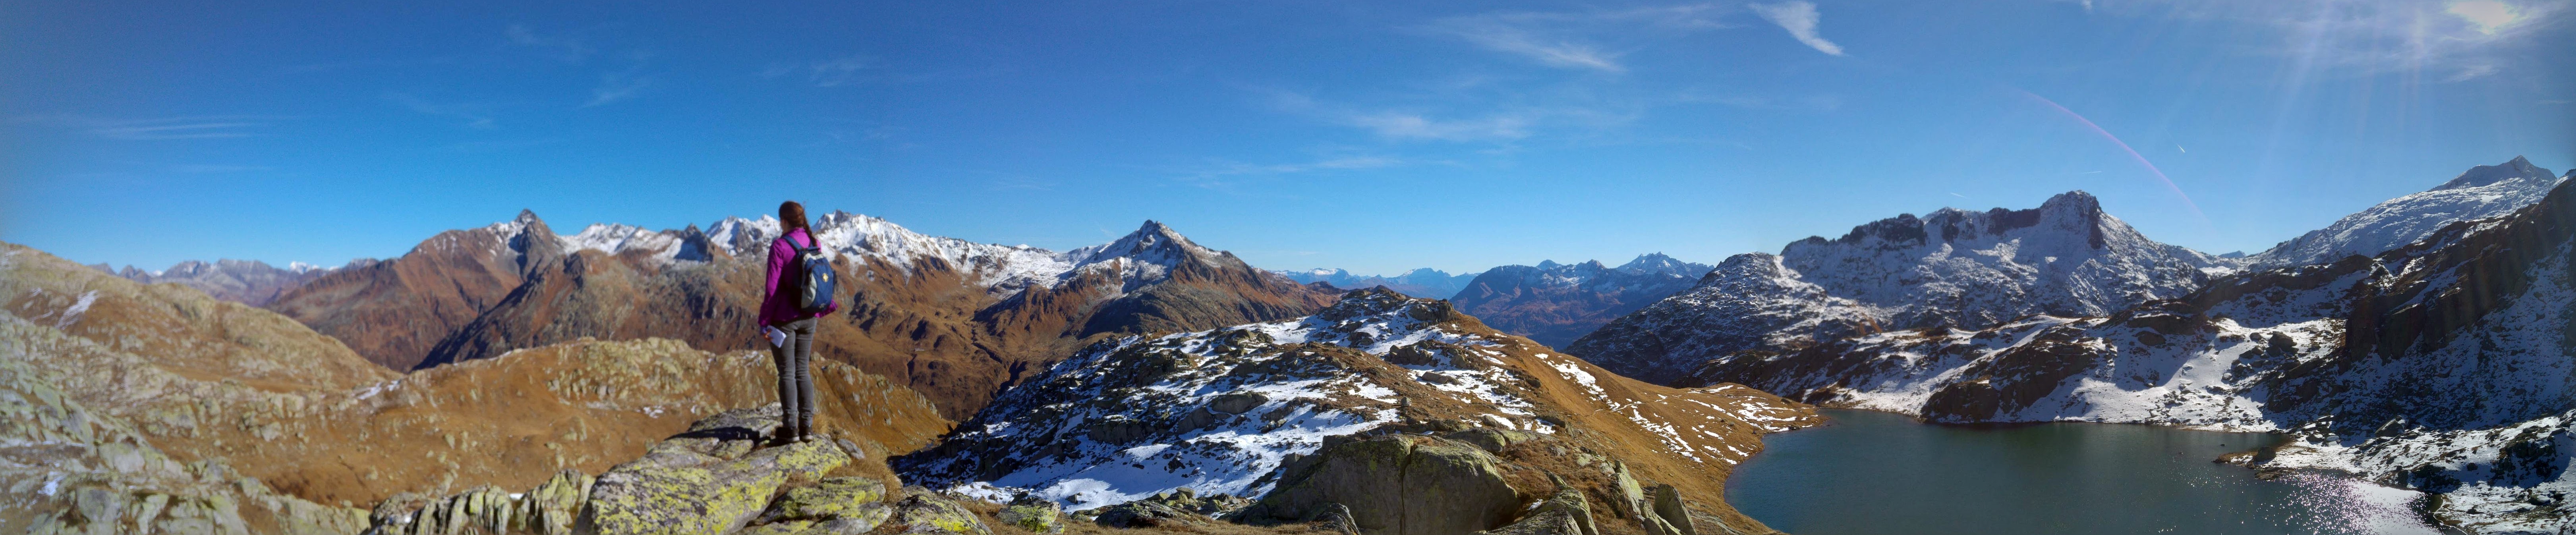 panorama image of the mountains